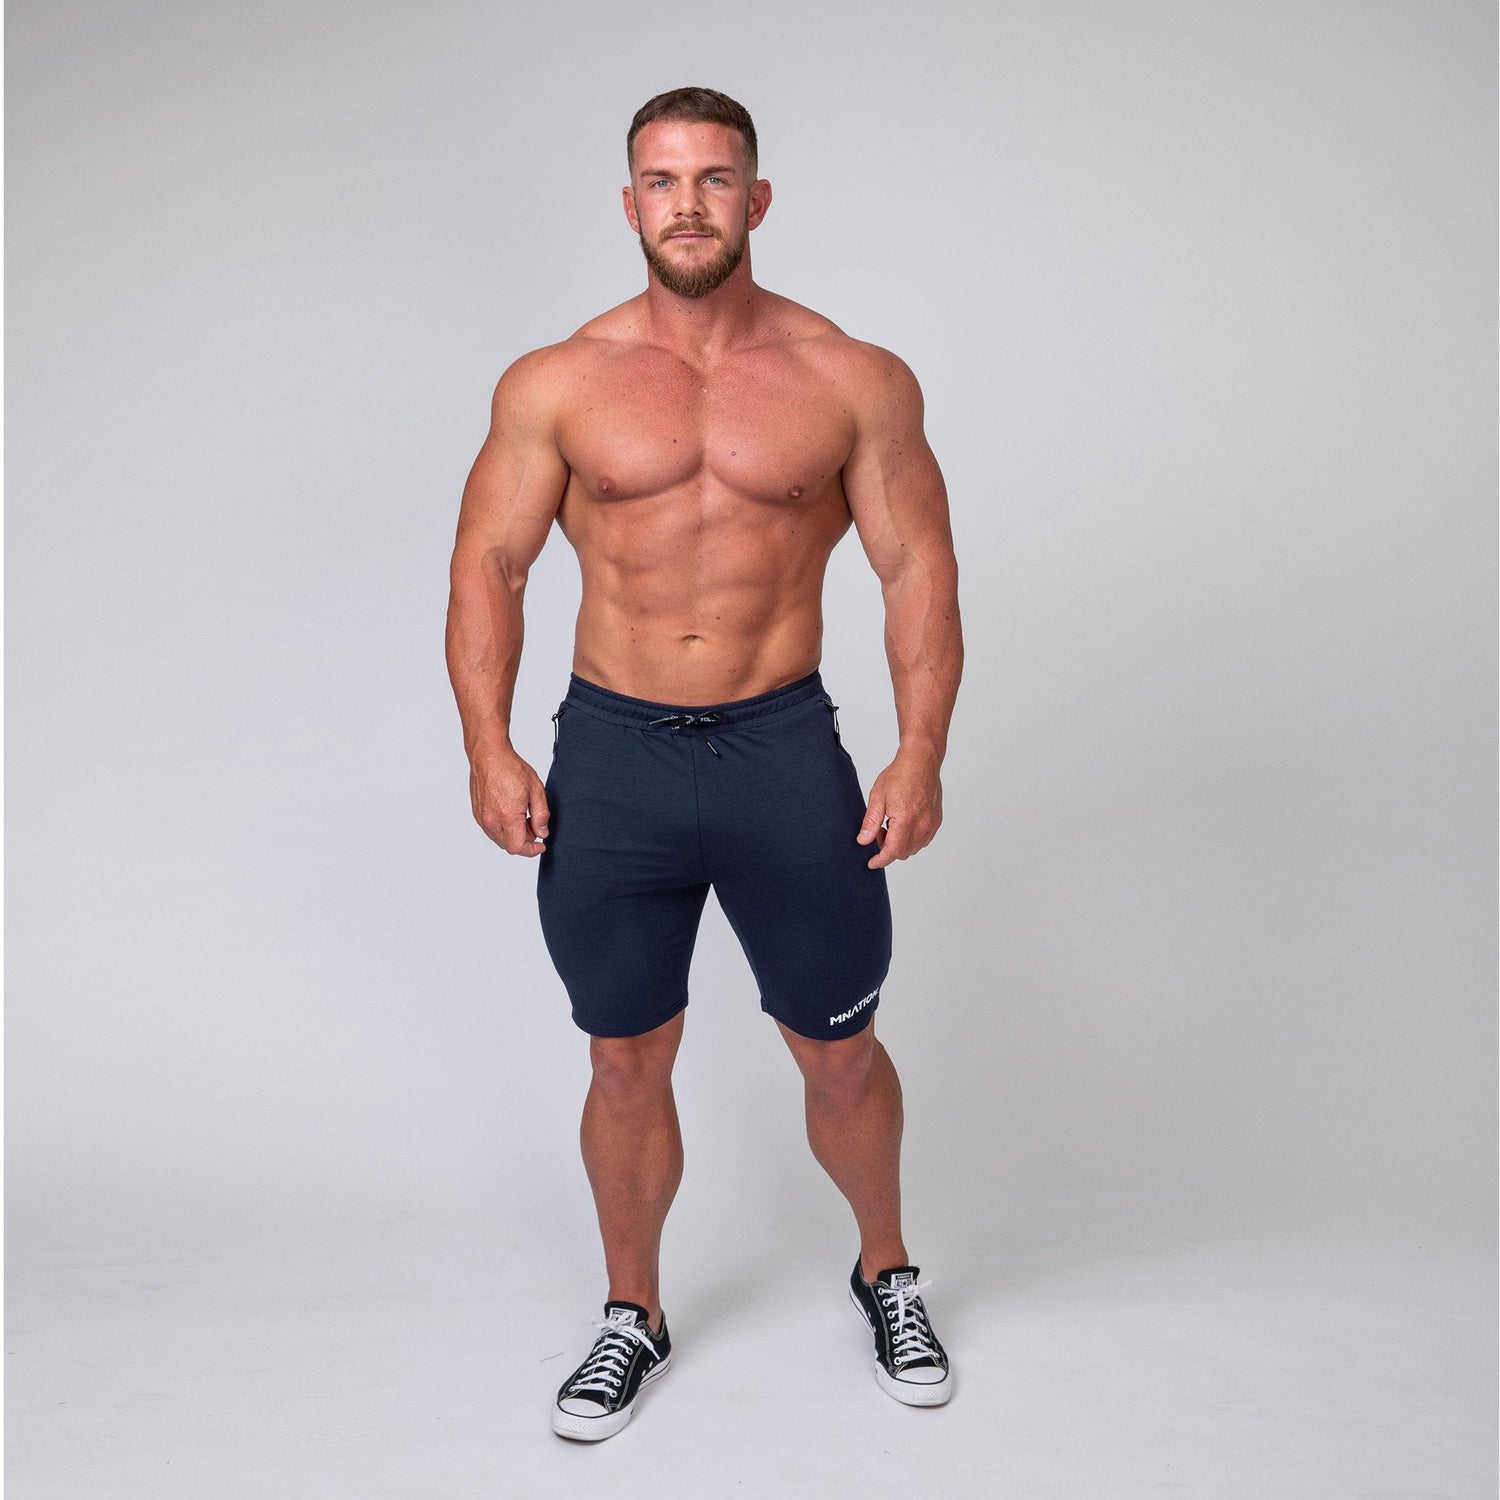 MNation Tapered Fit Shorts - Navy